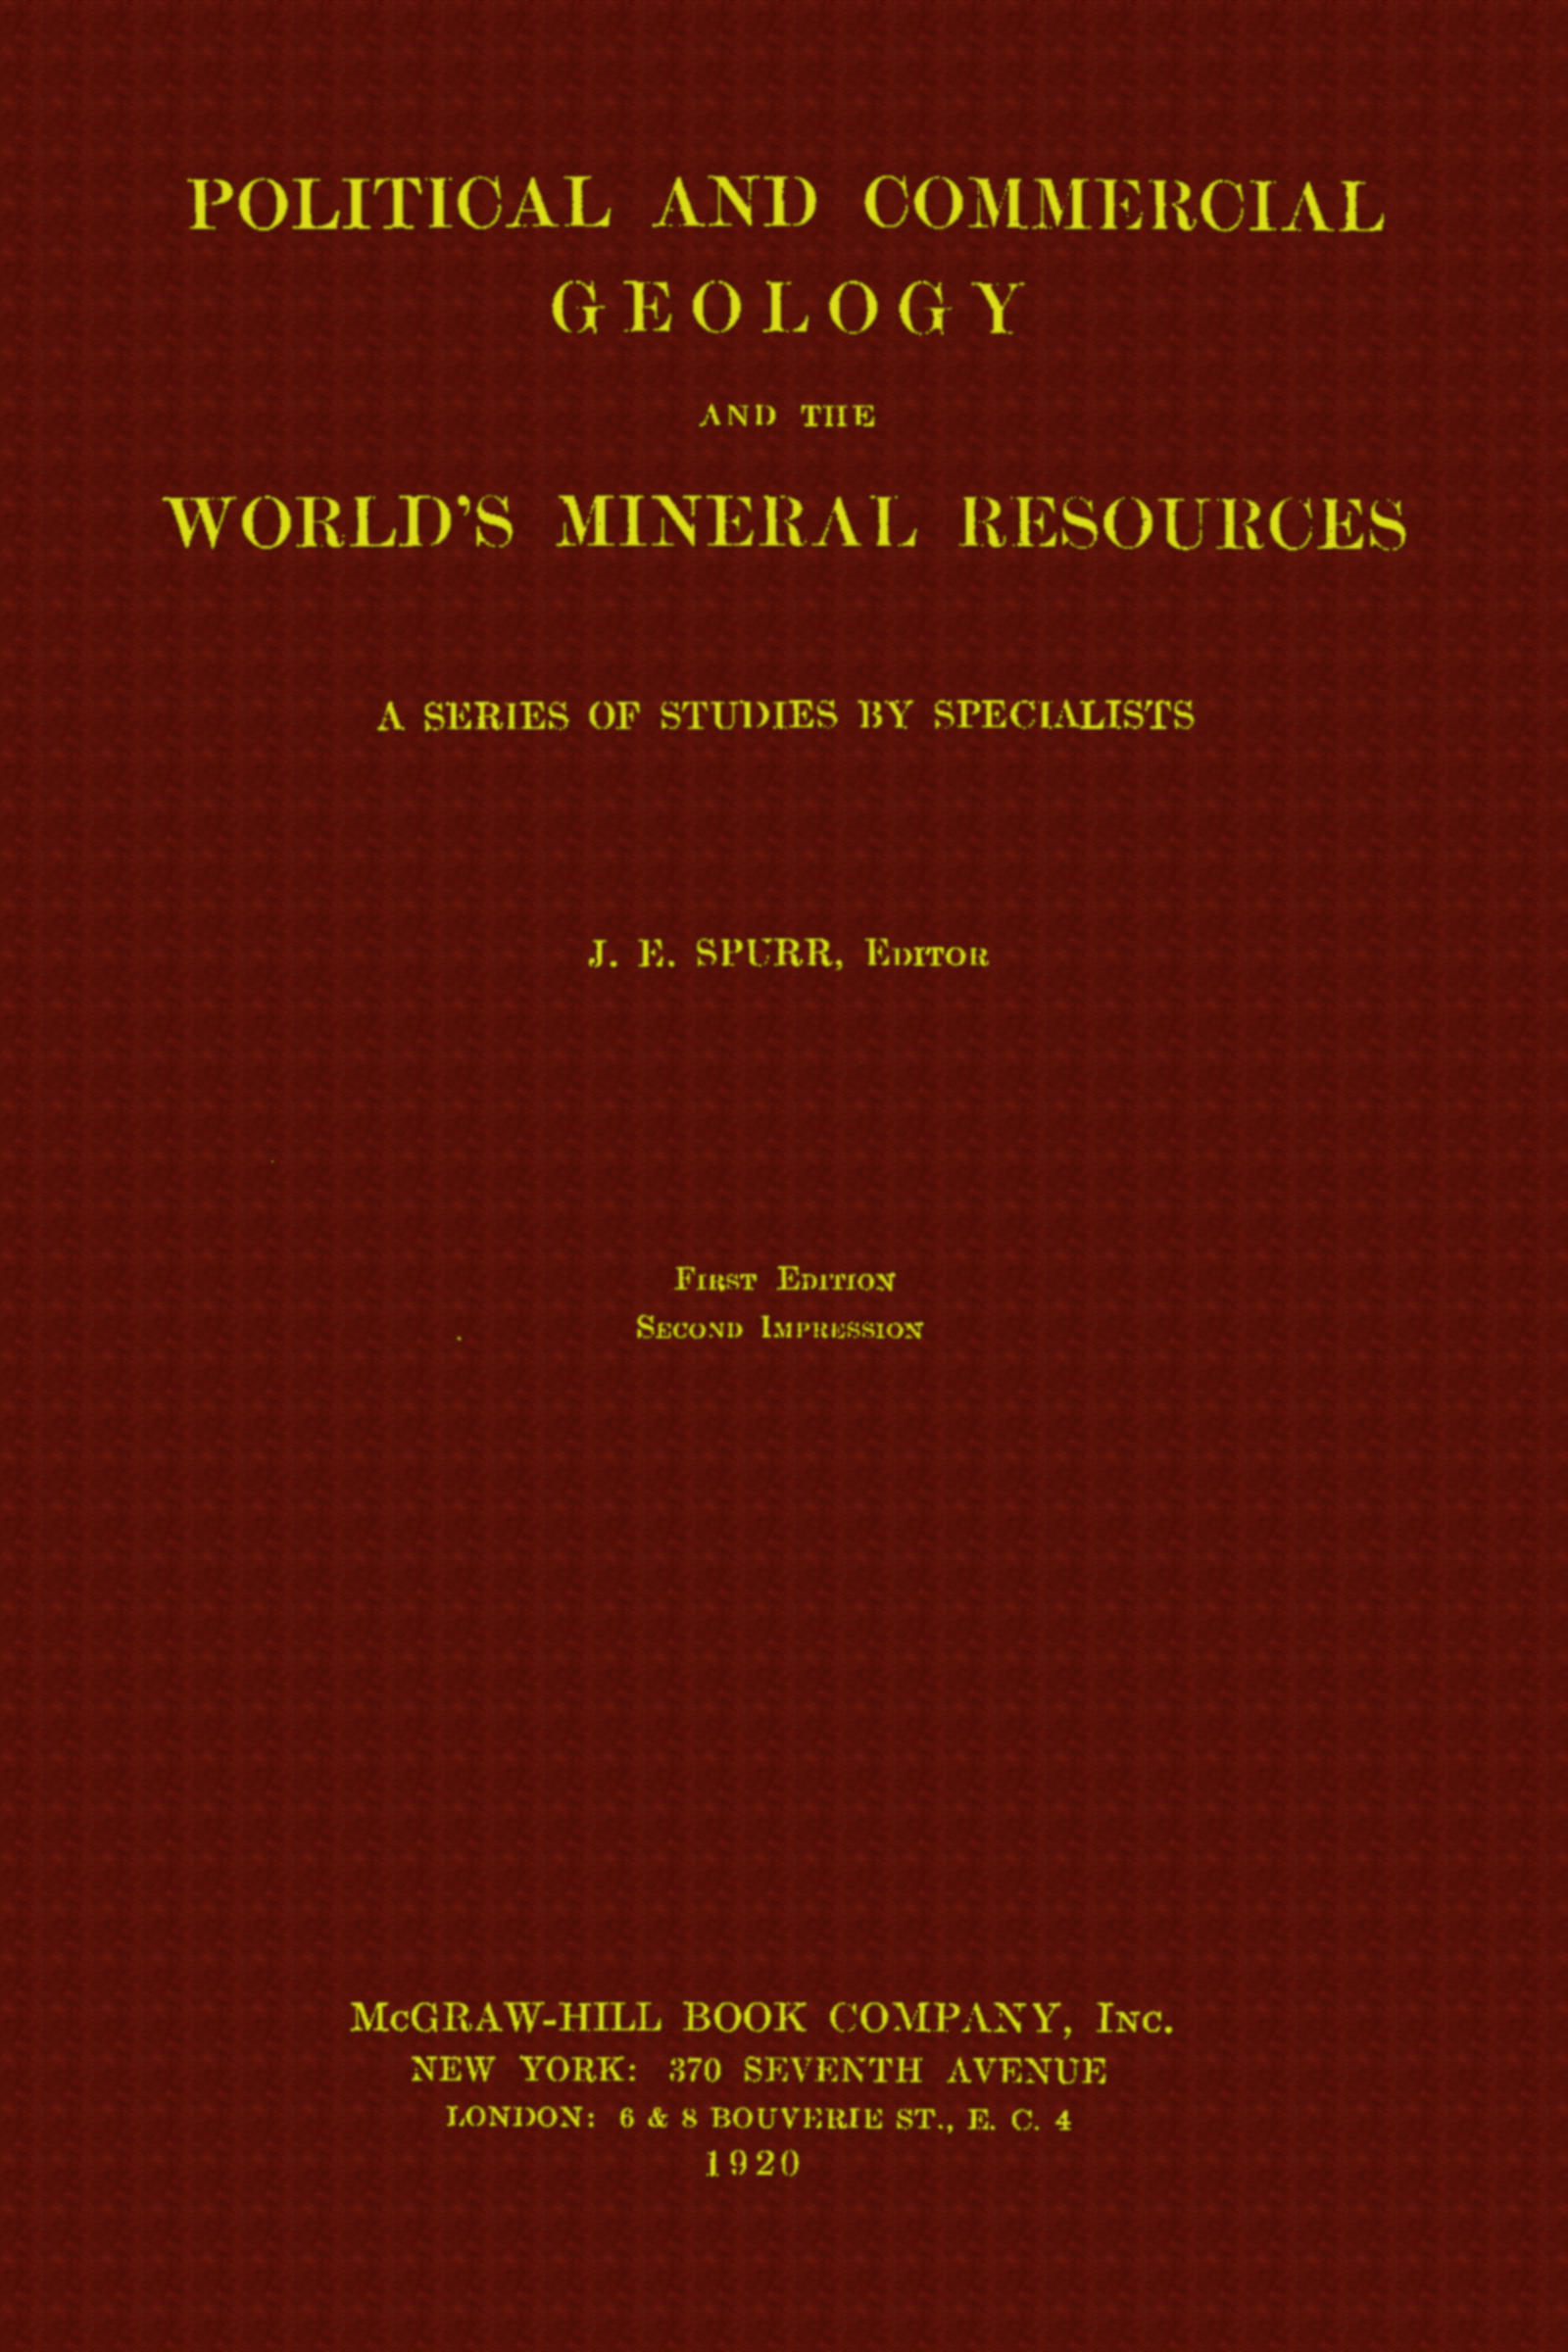 Political and commercial geology and the world's mineral resources